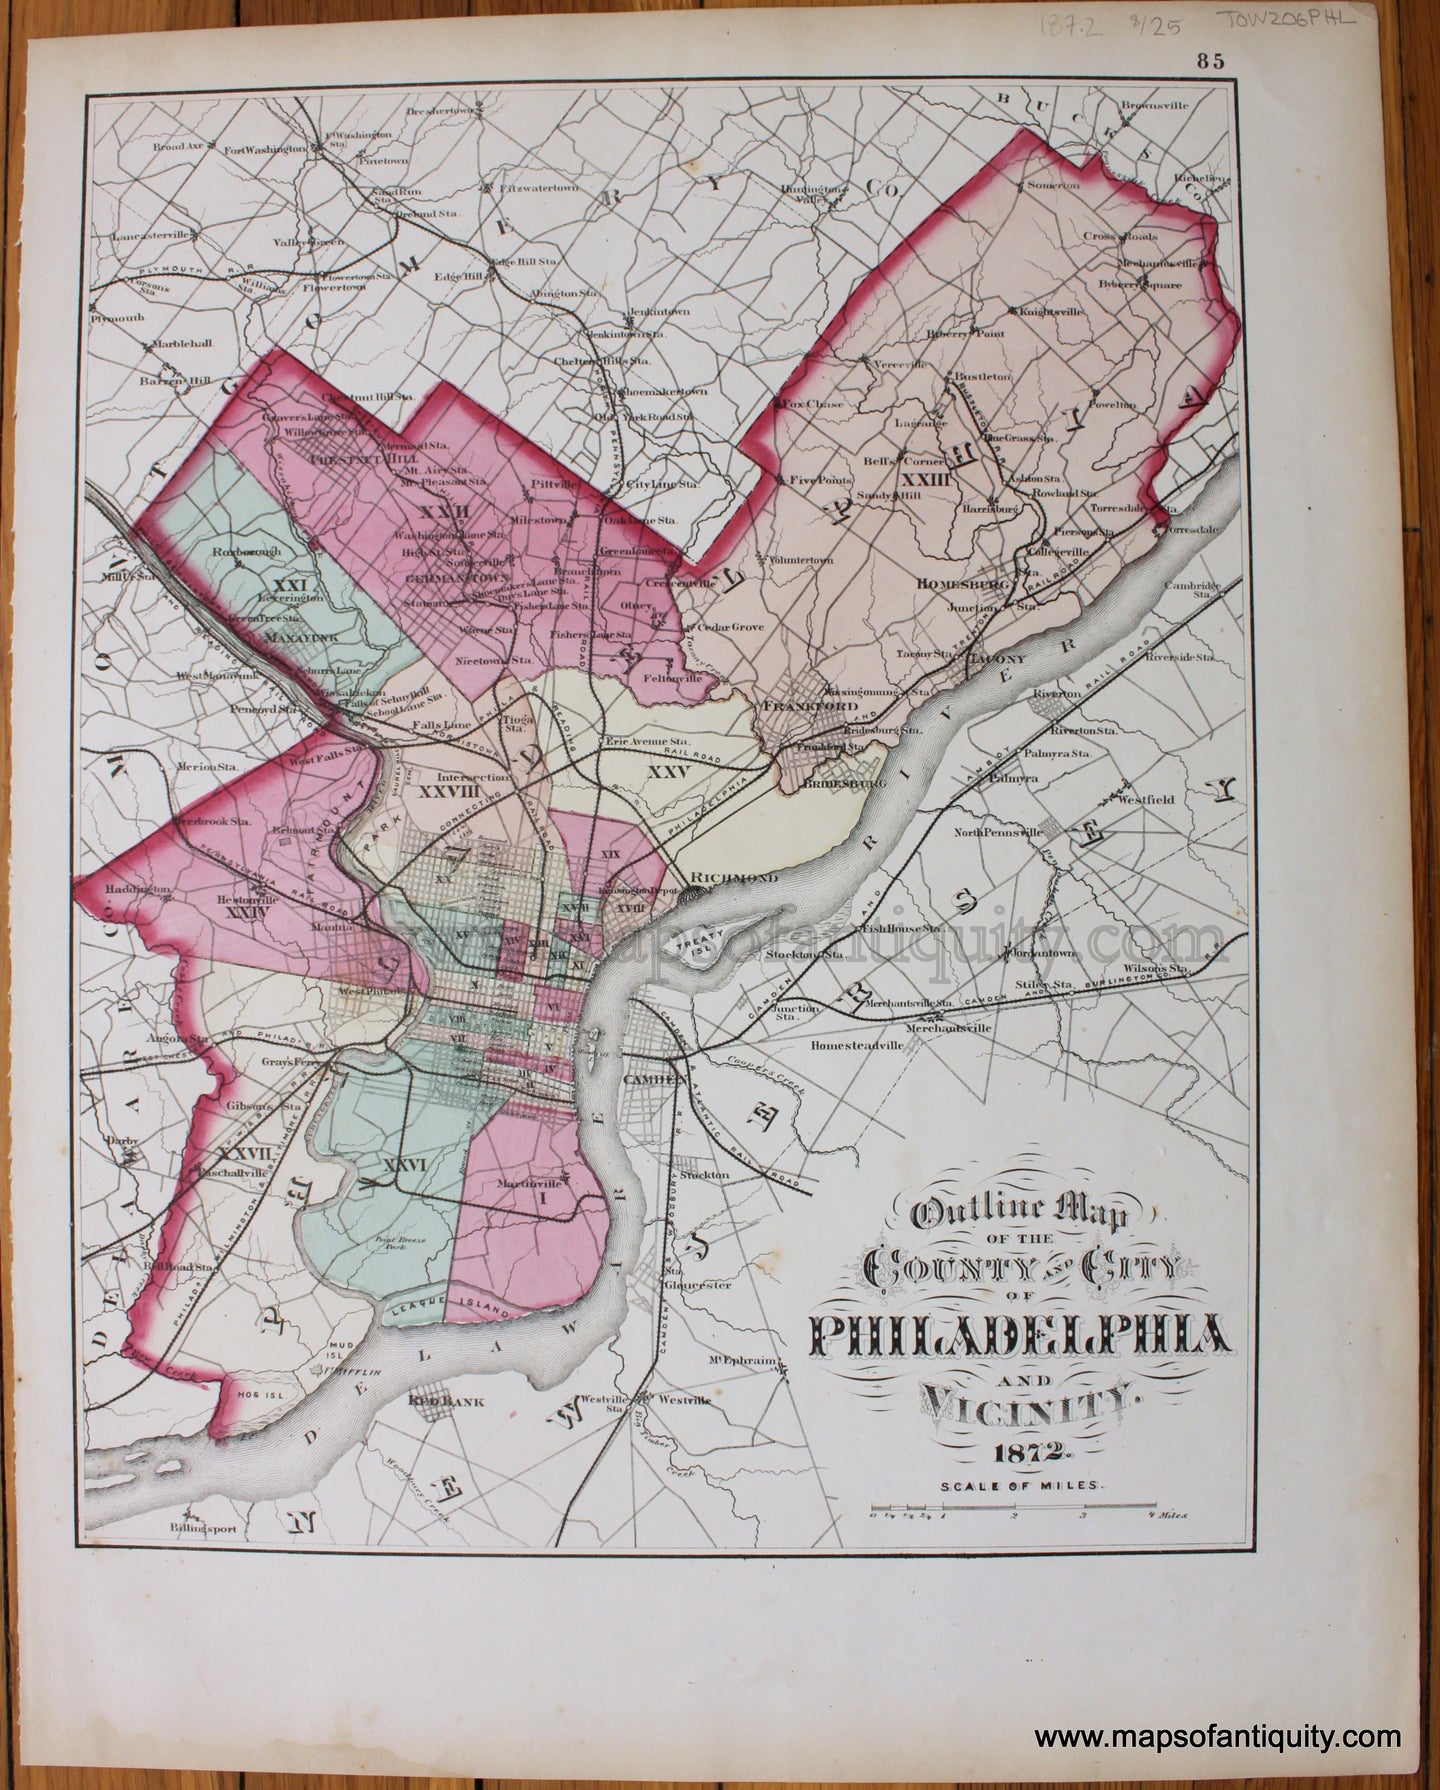 Outline-Map-of-the-County-and-City-of-Philadelphia-and-Vicinity